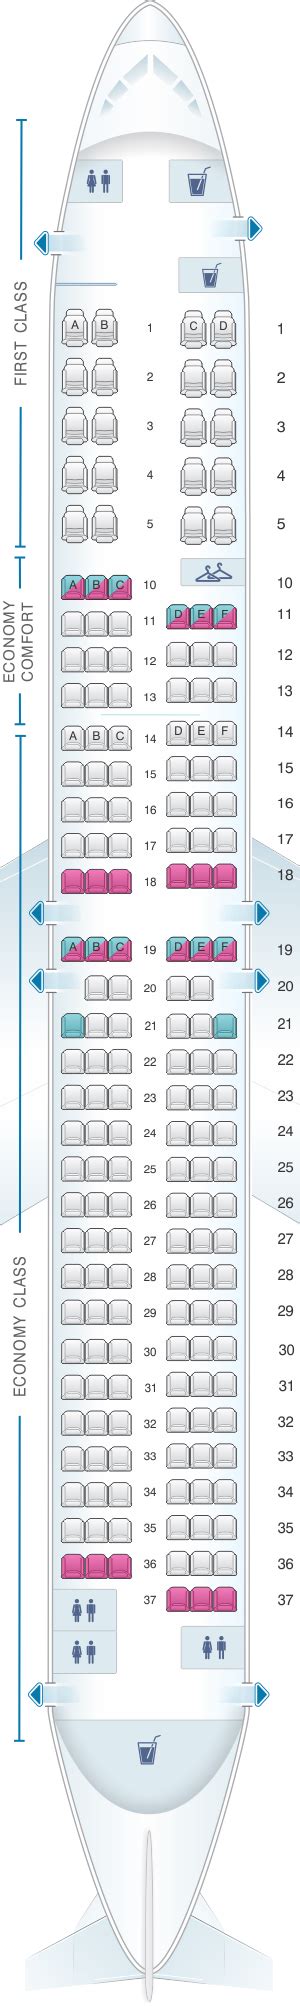 delta 737-900 seating map